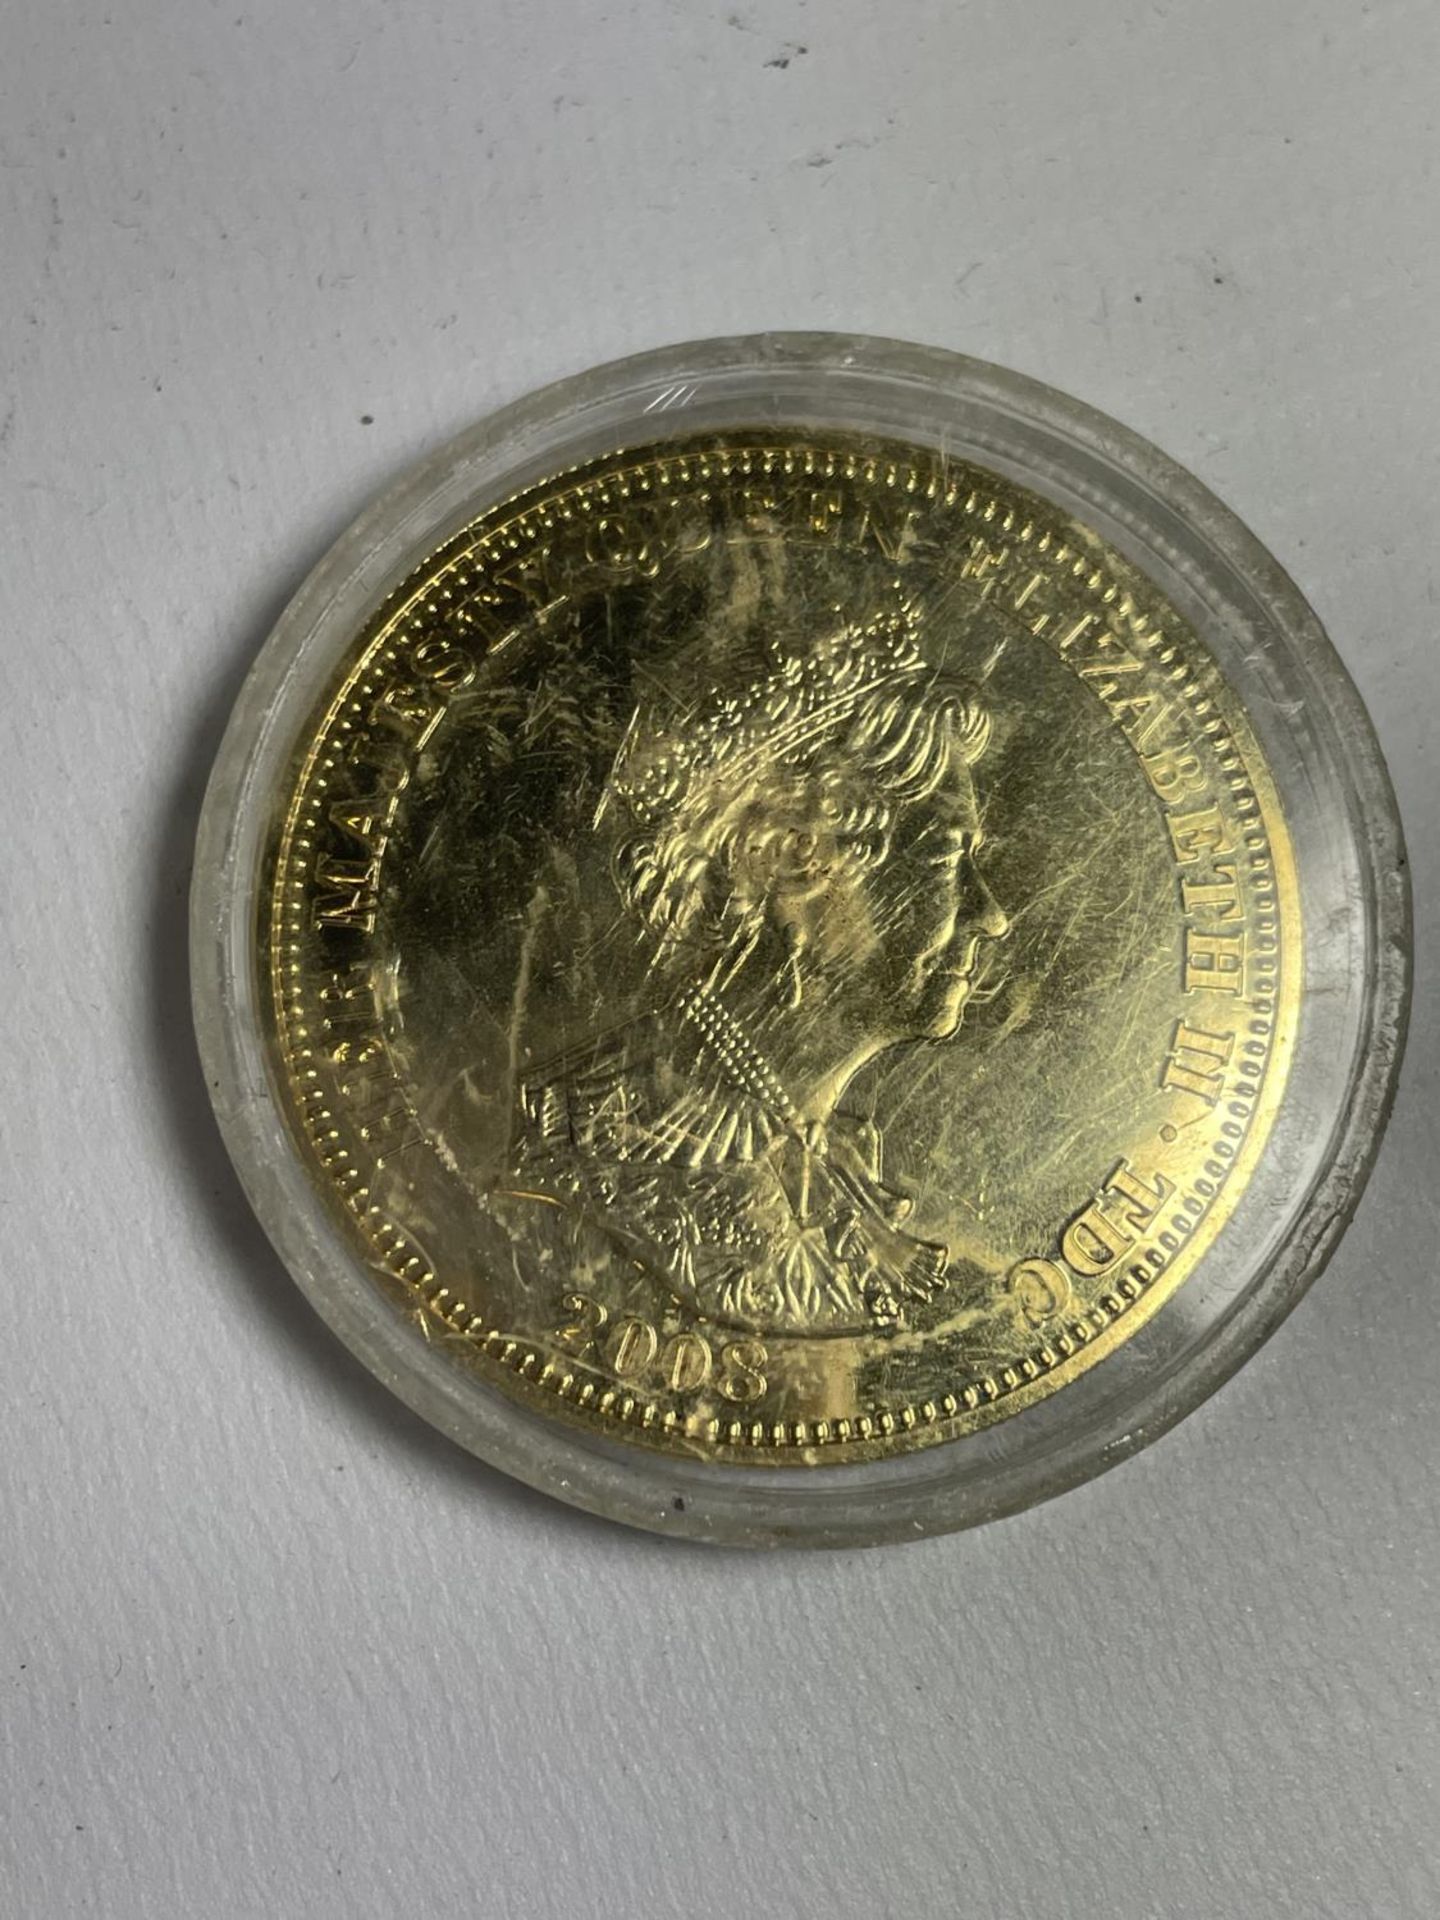 A SILVER GILT 2008 £5 COIN DEPICTING GEORGE AND THE DRAGON WITH RUBIES - Image 2 of 2